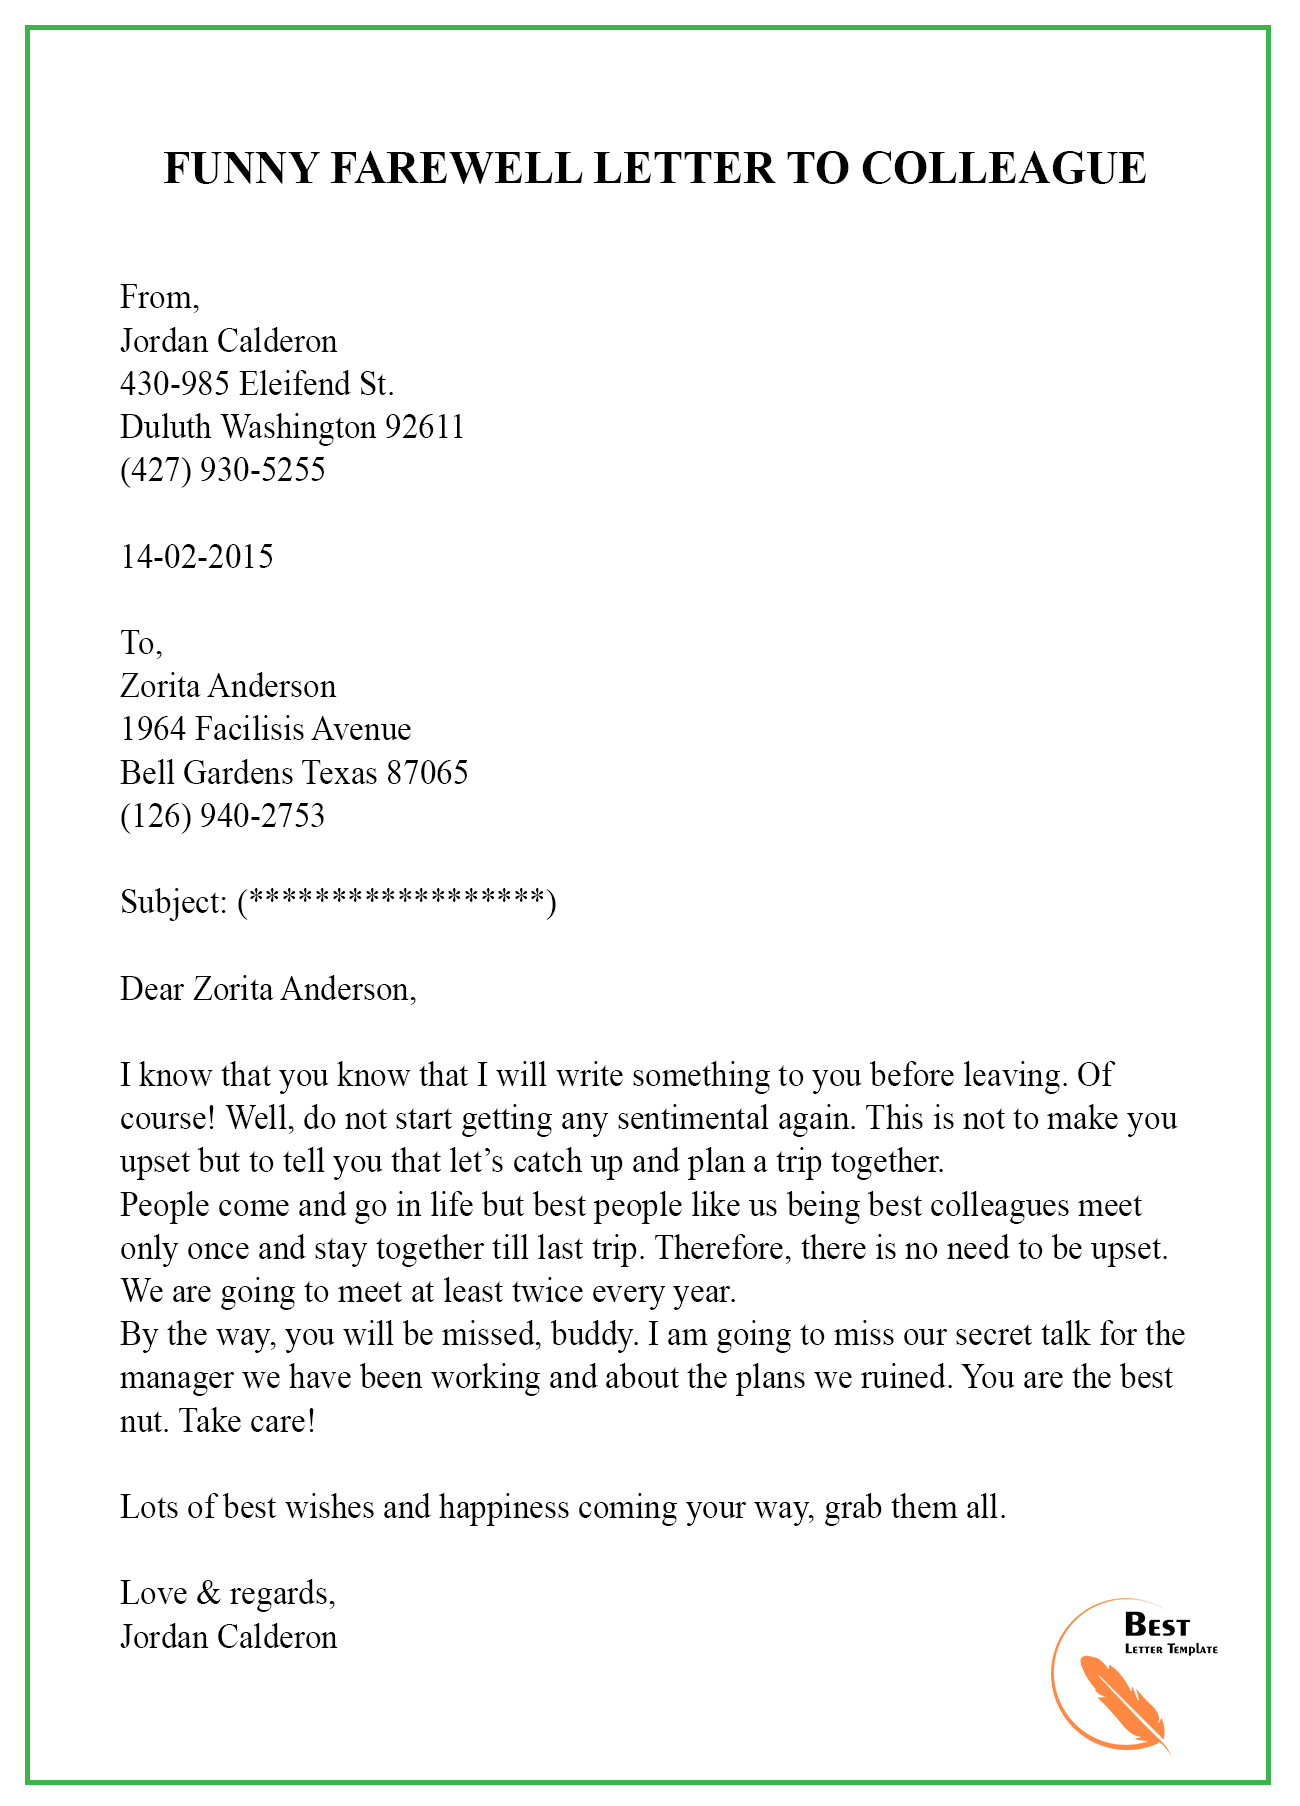 funny-farewell-letter-to-colleague-best-letter-template